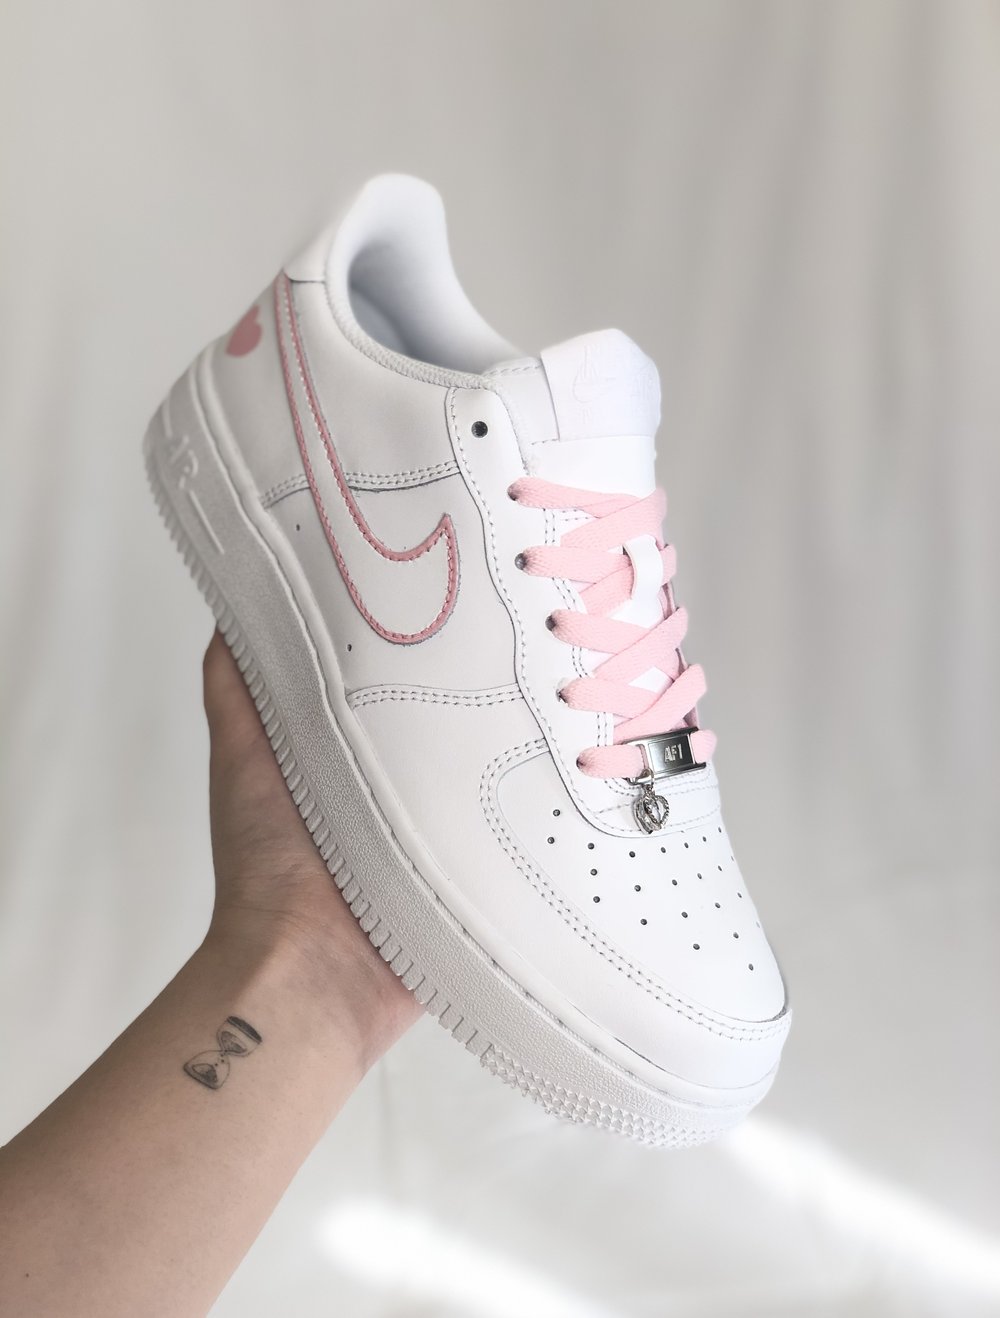 Nike Air Force 1 Womens White Pink Red Girls Gs AF1 Valentines Day Gift Love